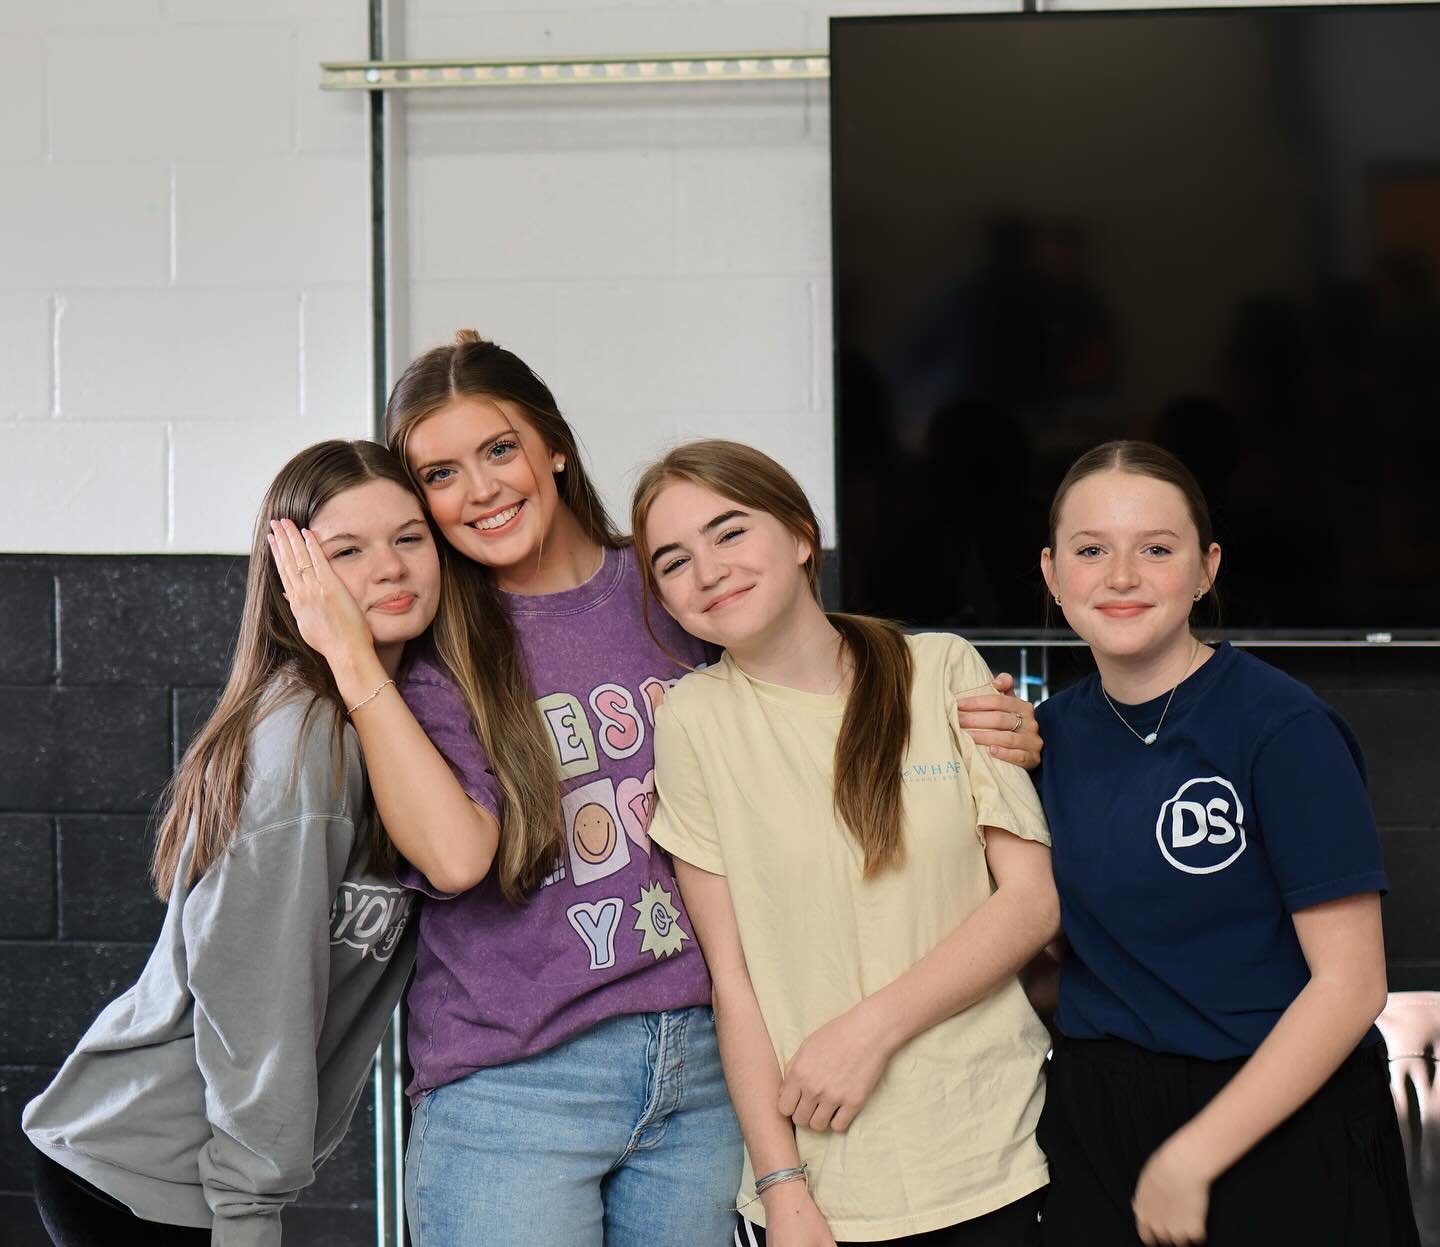 &ldquo;My small group girls have truly brought more light into my life than I could have ever imagined! I love watching the lightbulb go off in their head when something in the lesson resonates with what they are going through in that moment. It has 